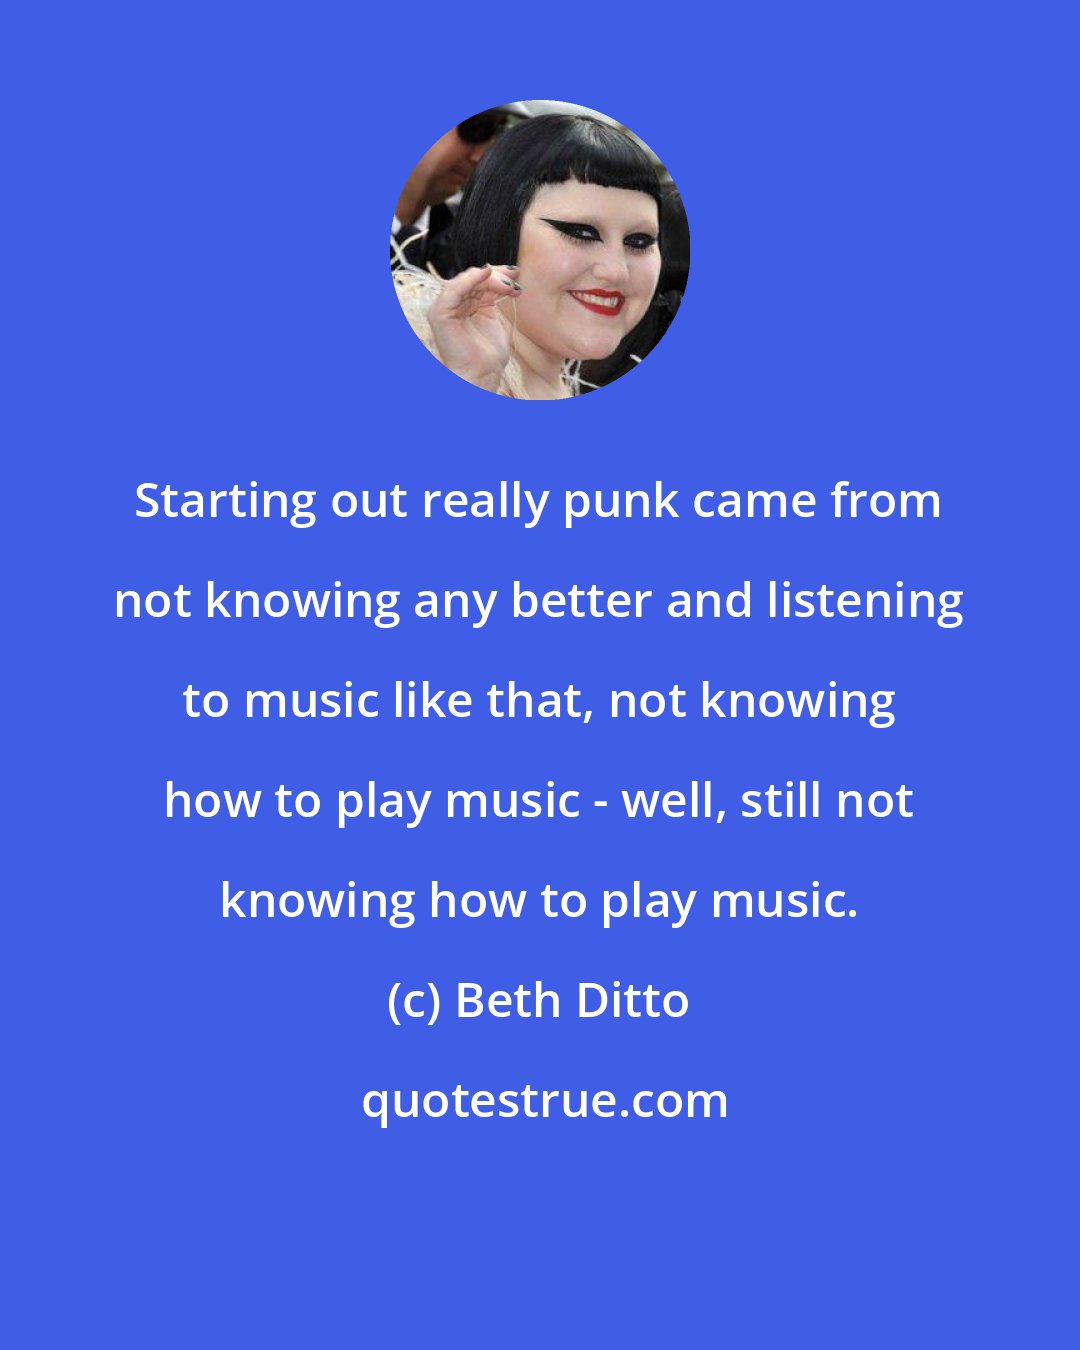 Beth Ditto: Starting out really punk came from not knowing any better and listening to music like that, not knowing how to play music - well, still not knowing how to play music.